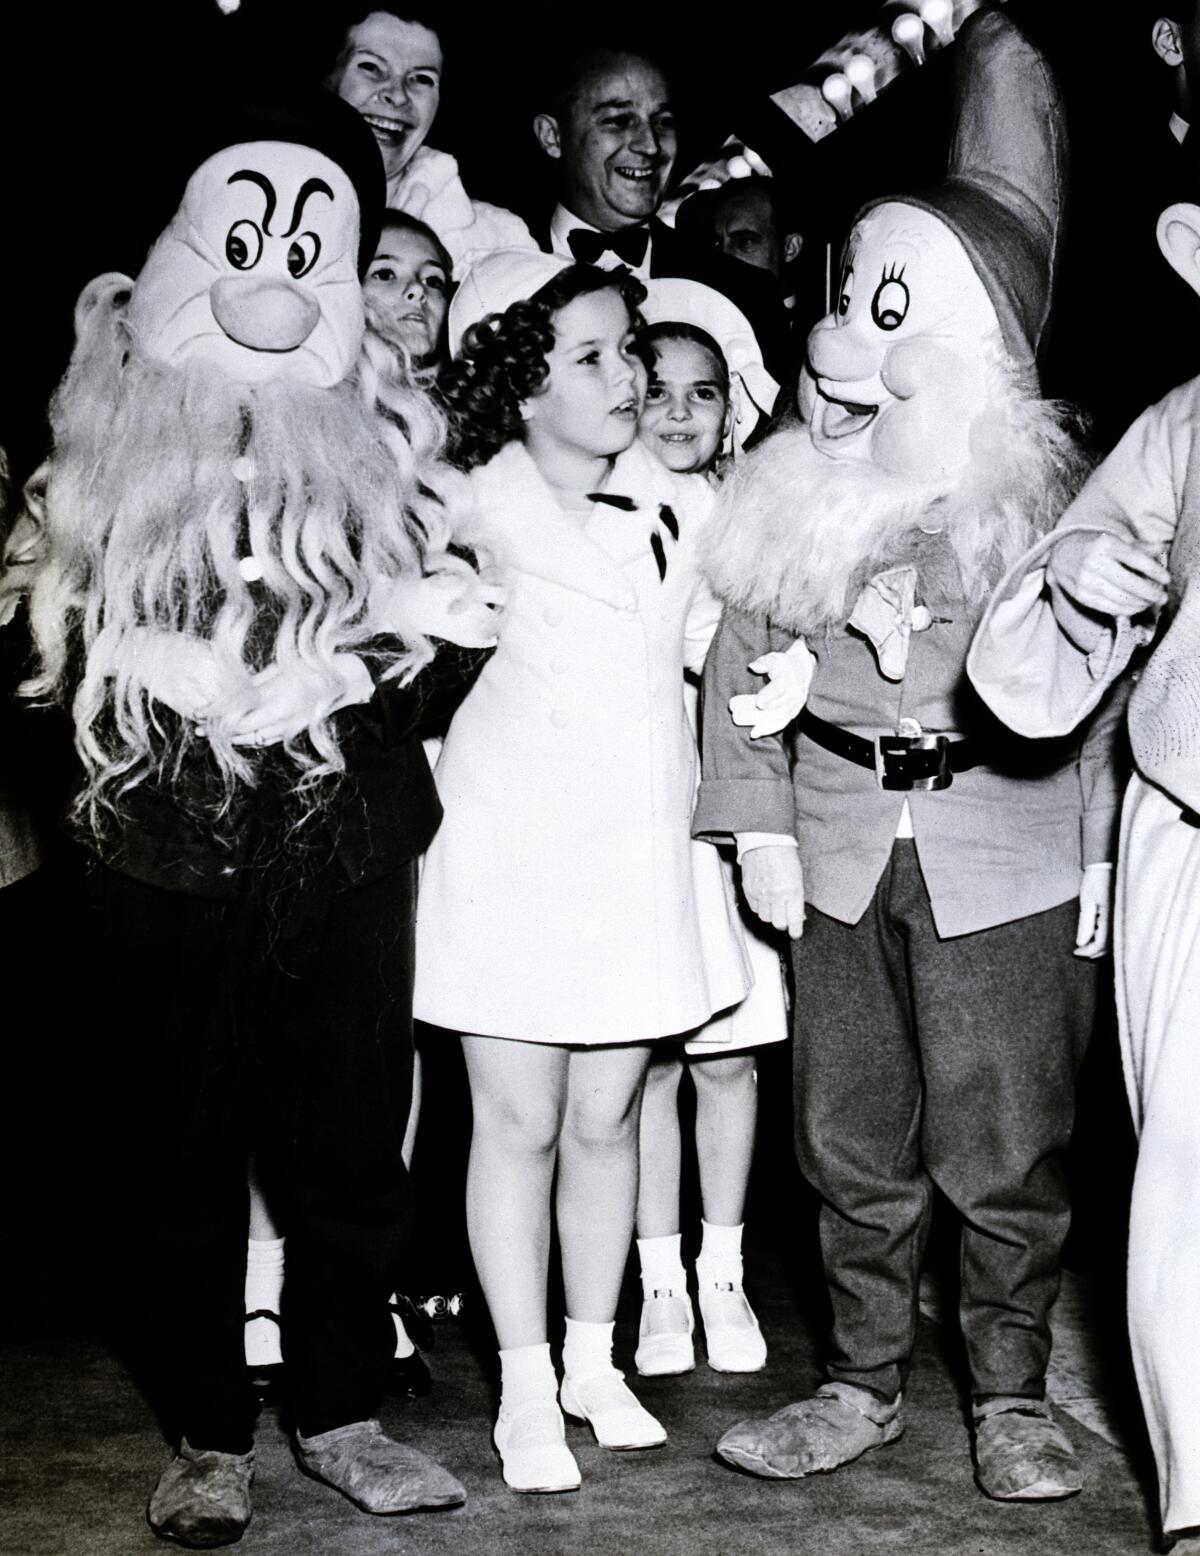 Shirley Temple stands with actors dressed as two characters from "Snow White and the Seven Dwarfs."